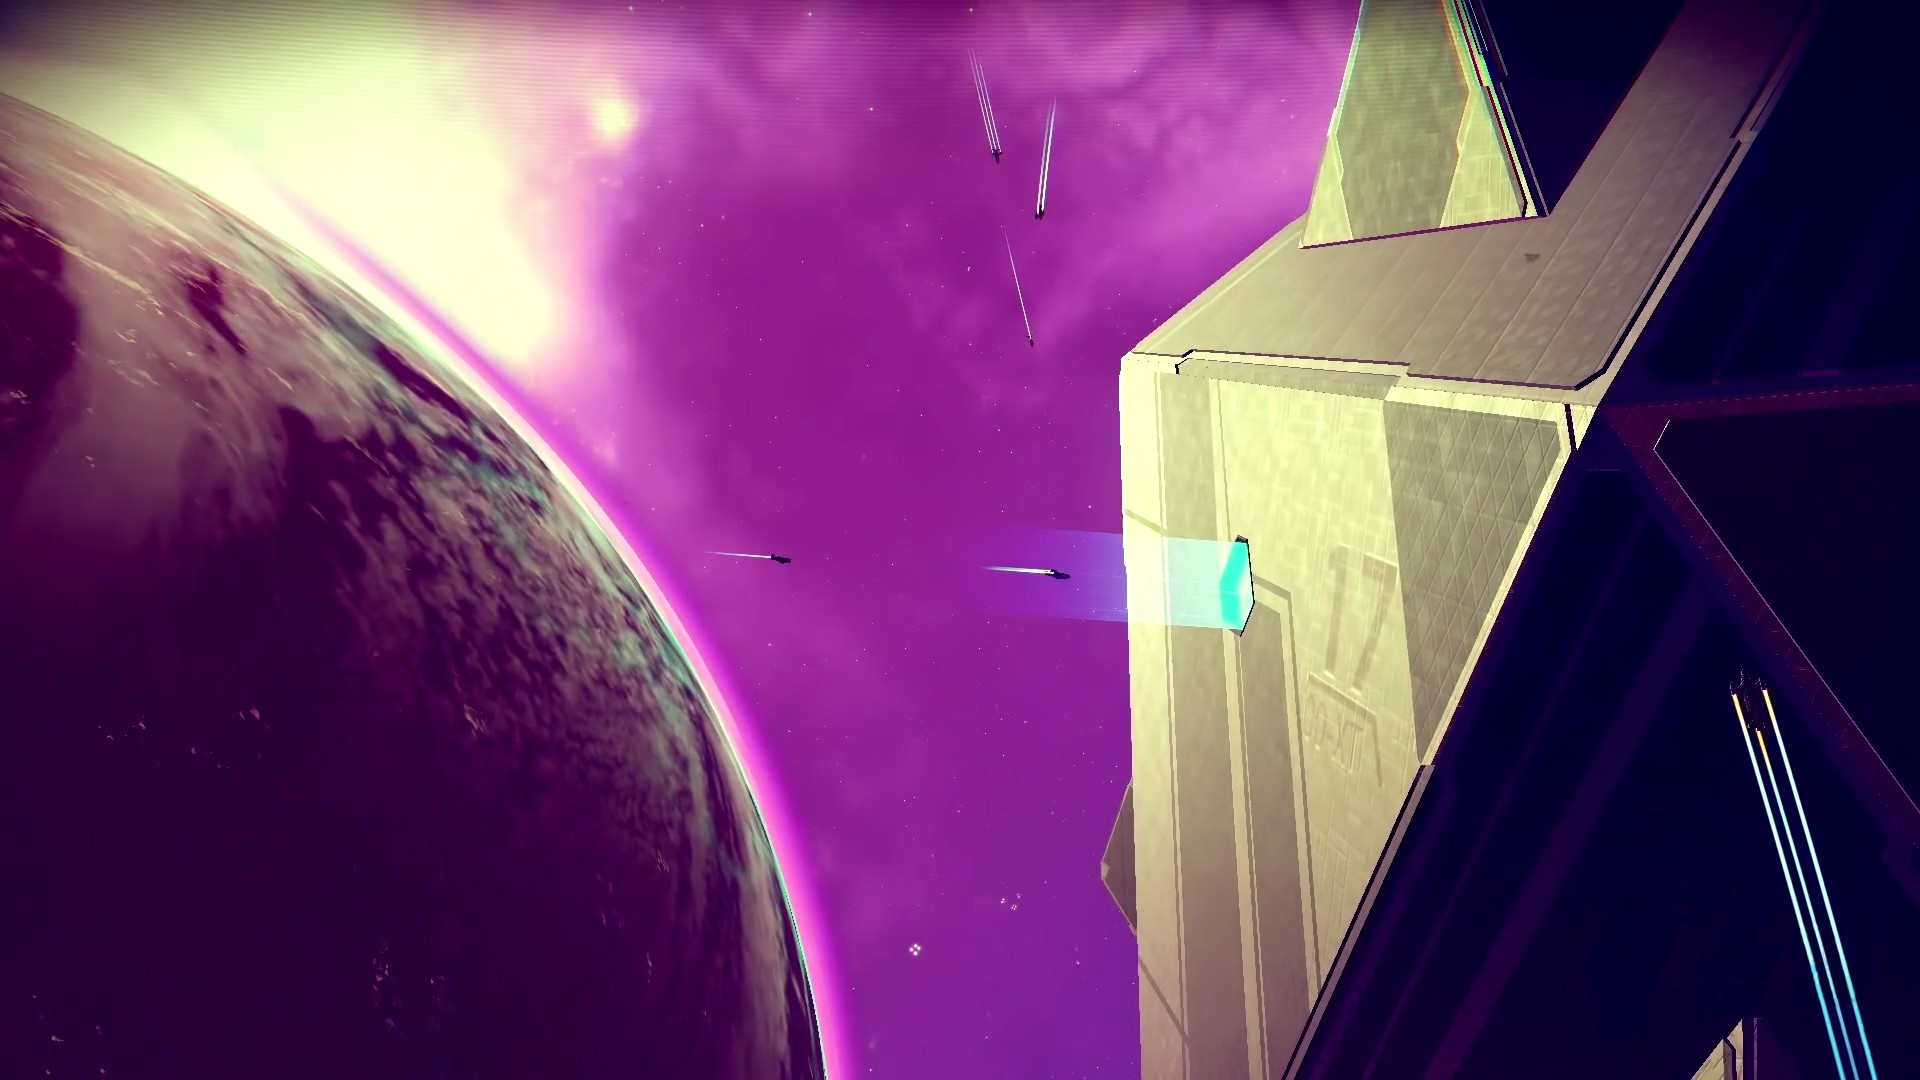 General 1920x1080 No Man's Sky space space station video games planet PC gaming screen shot